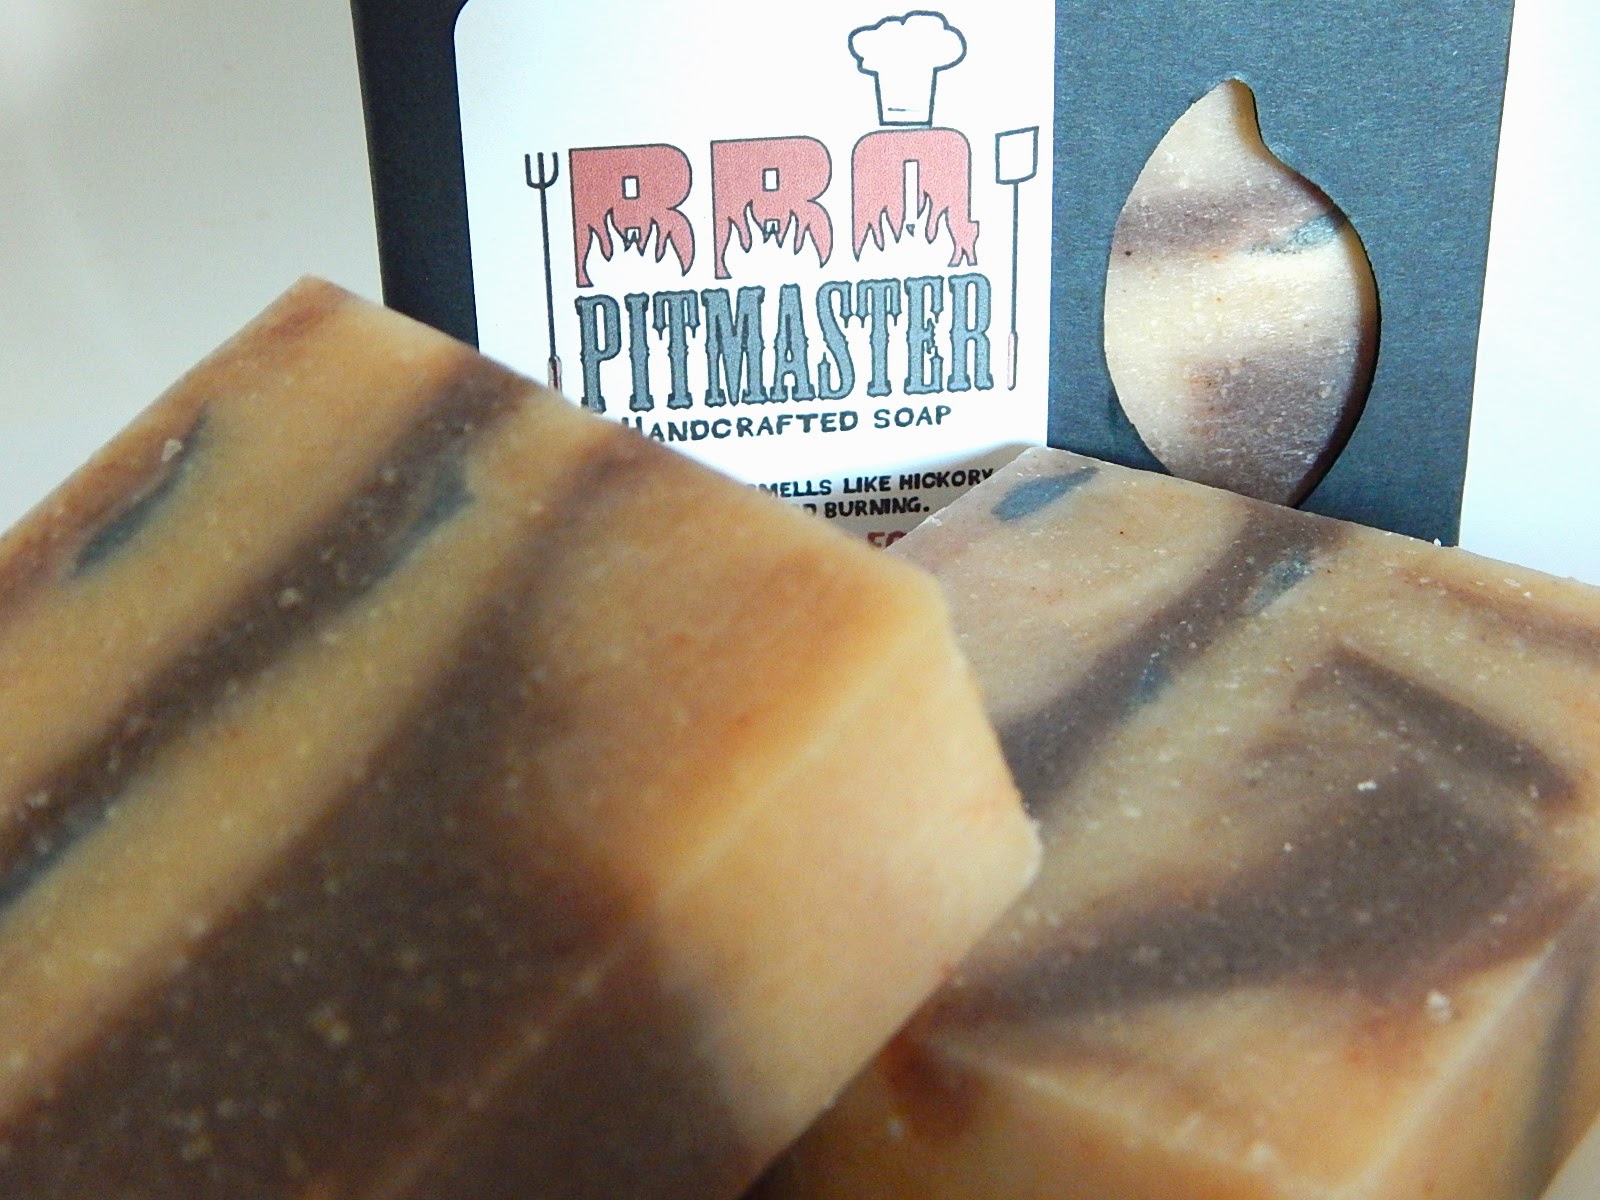 BBQ Pitmaster Man Cave Manly Soap (Gluten Free)